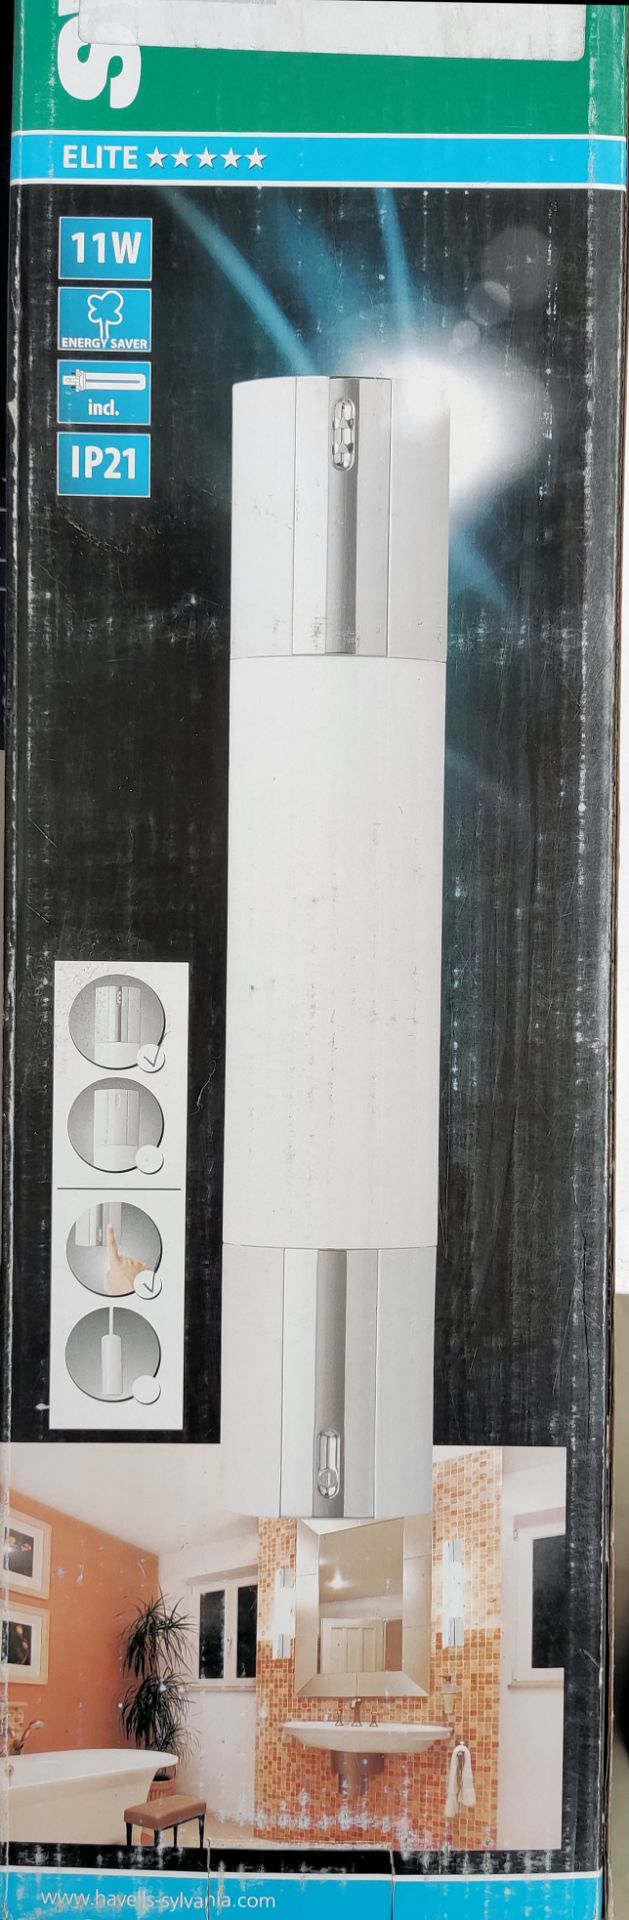 1 x Searchlight Sylvania Bathroom Strip Light - IP21 Rated, 11W - New Boxed Stock - CL323 - Ref: 686